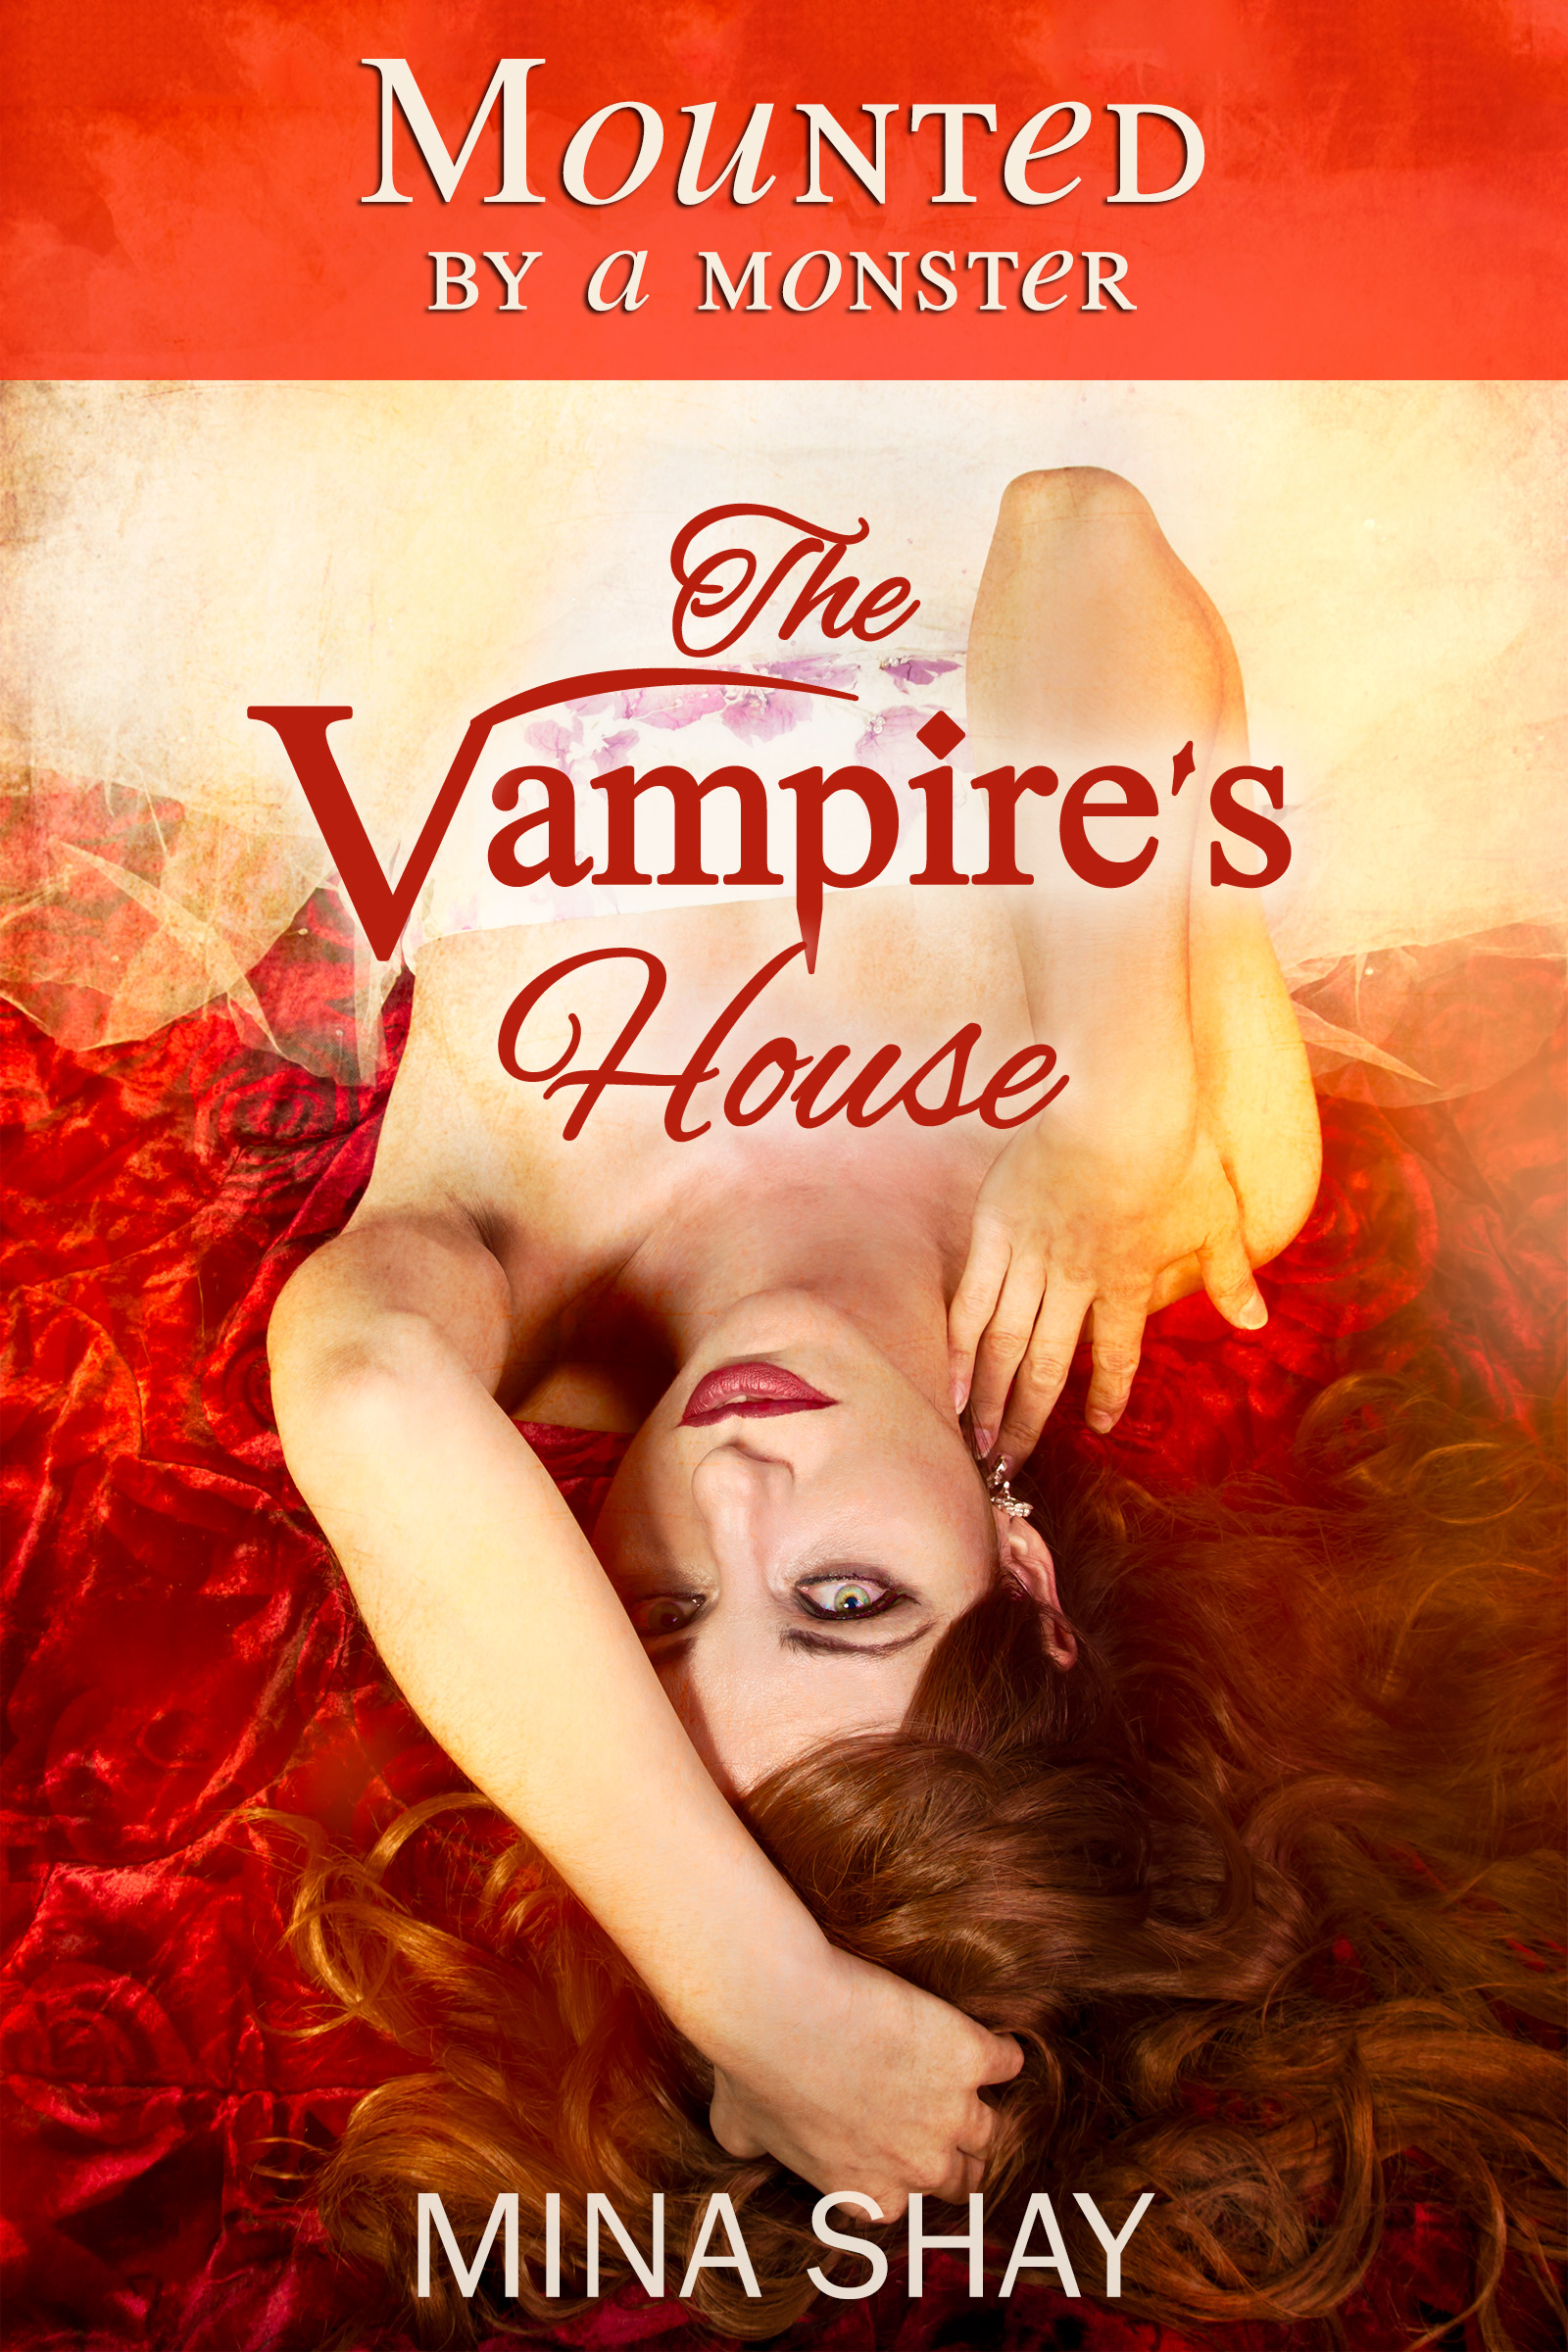 Mounted by a Monster: The Vampire's House